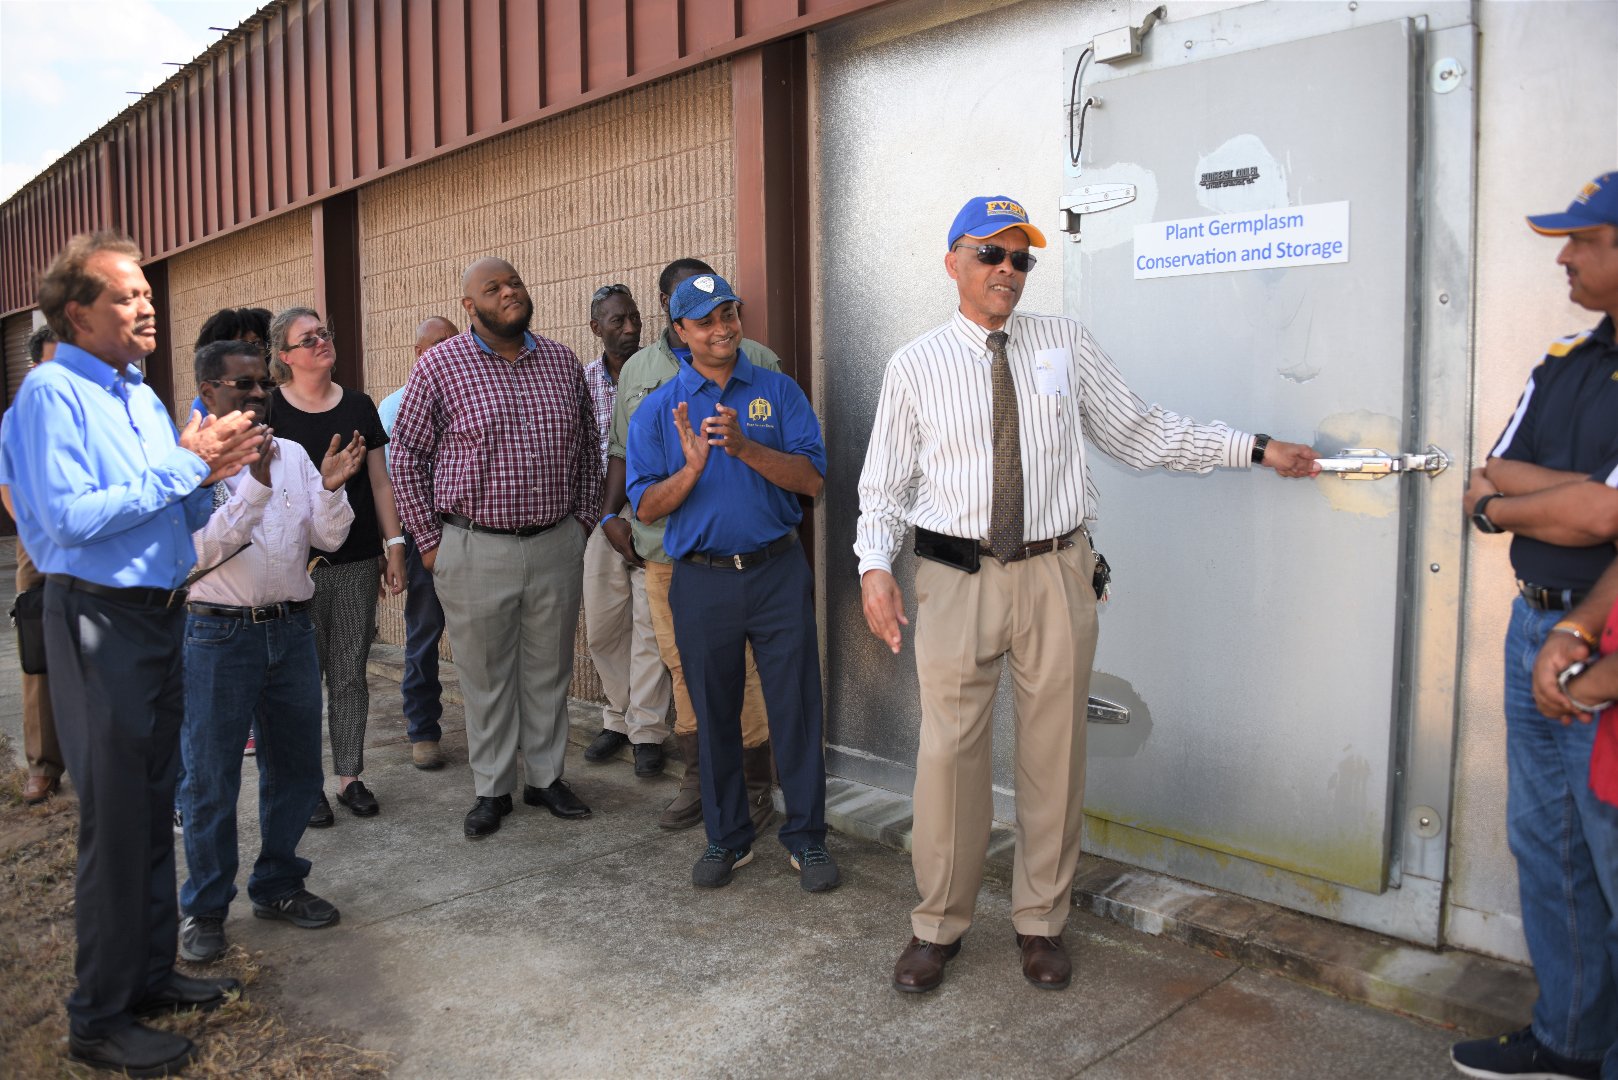 Noble opens the door to the new germplasm conservation walk-in cold storage unit on the university’s farm.